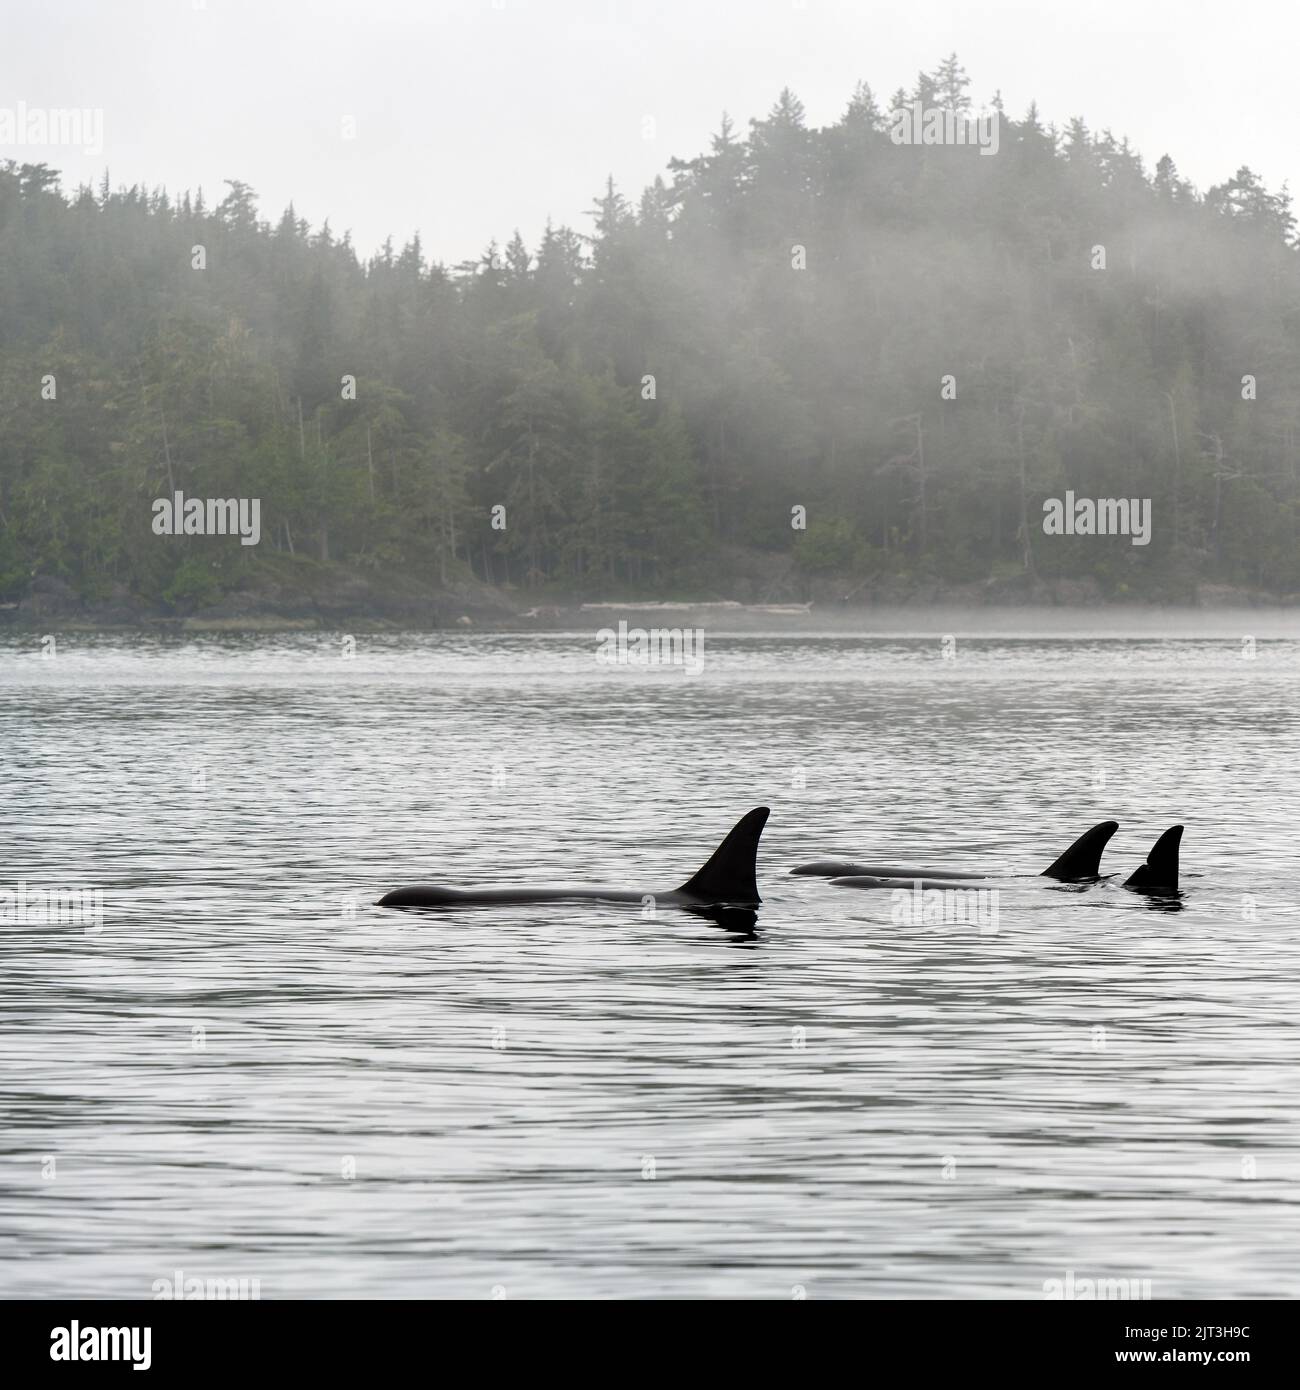 Three Orca or Killer Whale (Orcinus orca) on whale watching tour, Telegraph Cove, Vancouver Island, British Columbia, Canada. Stock Photo